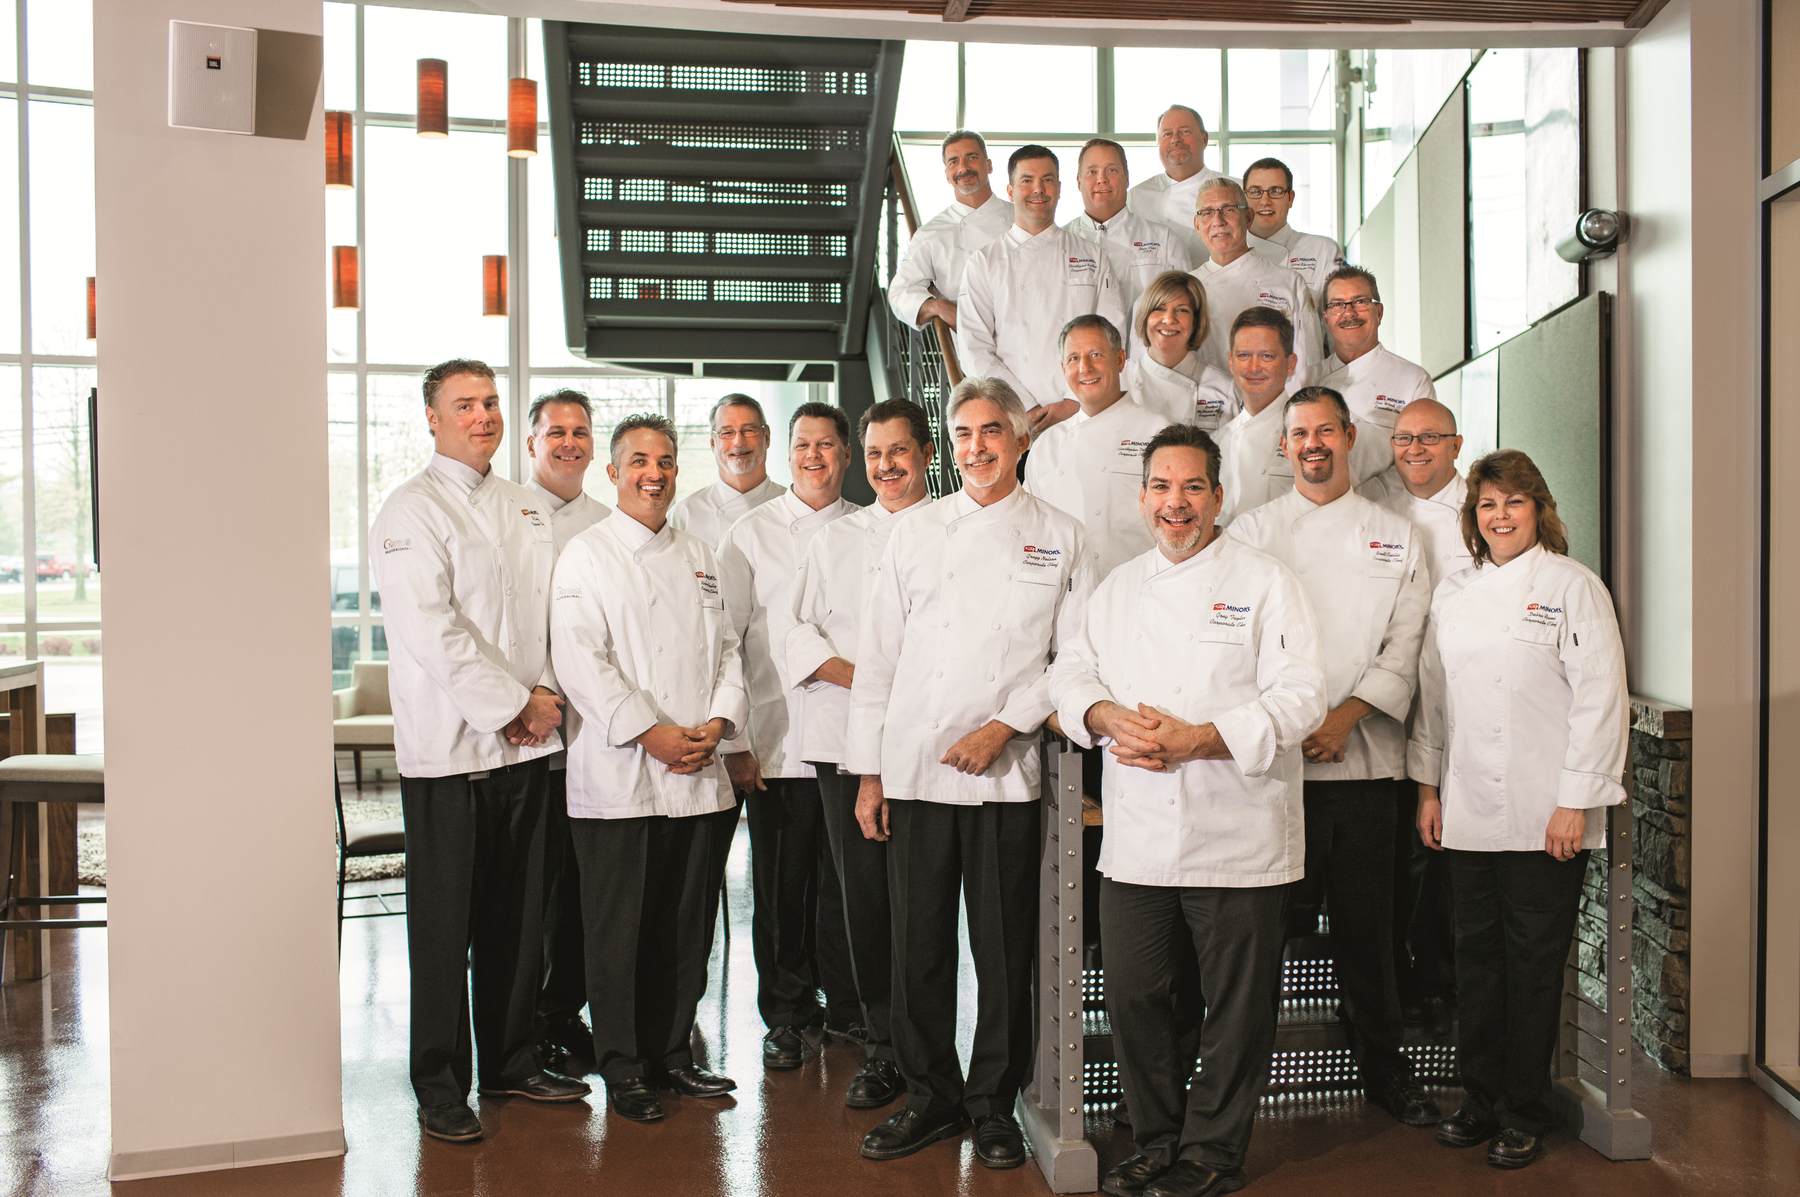 Chefs posing for photo